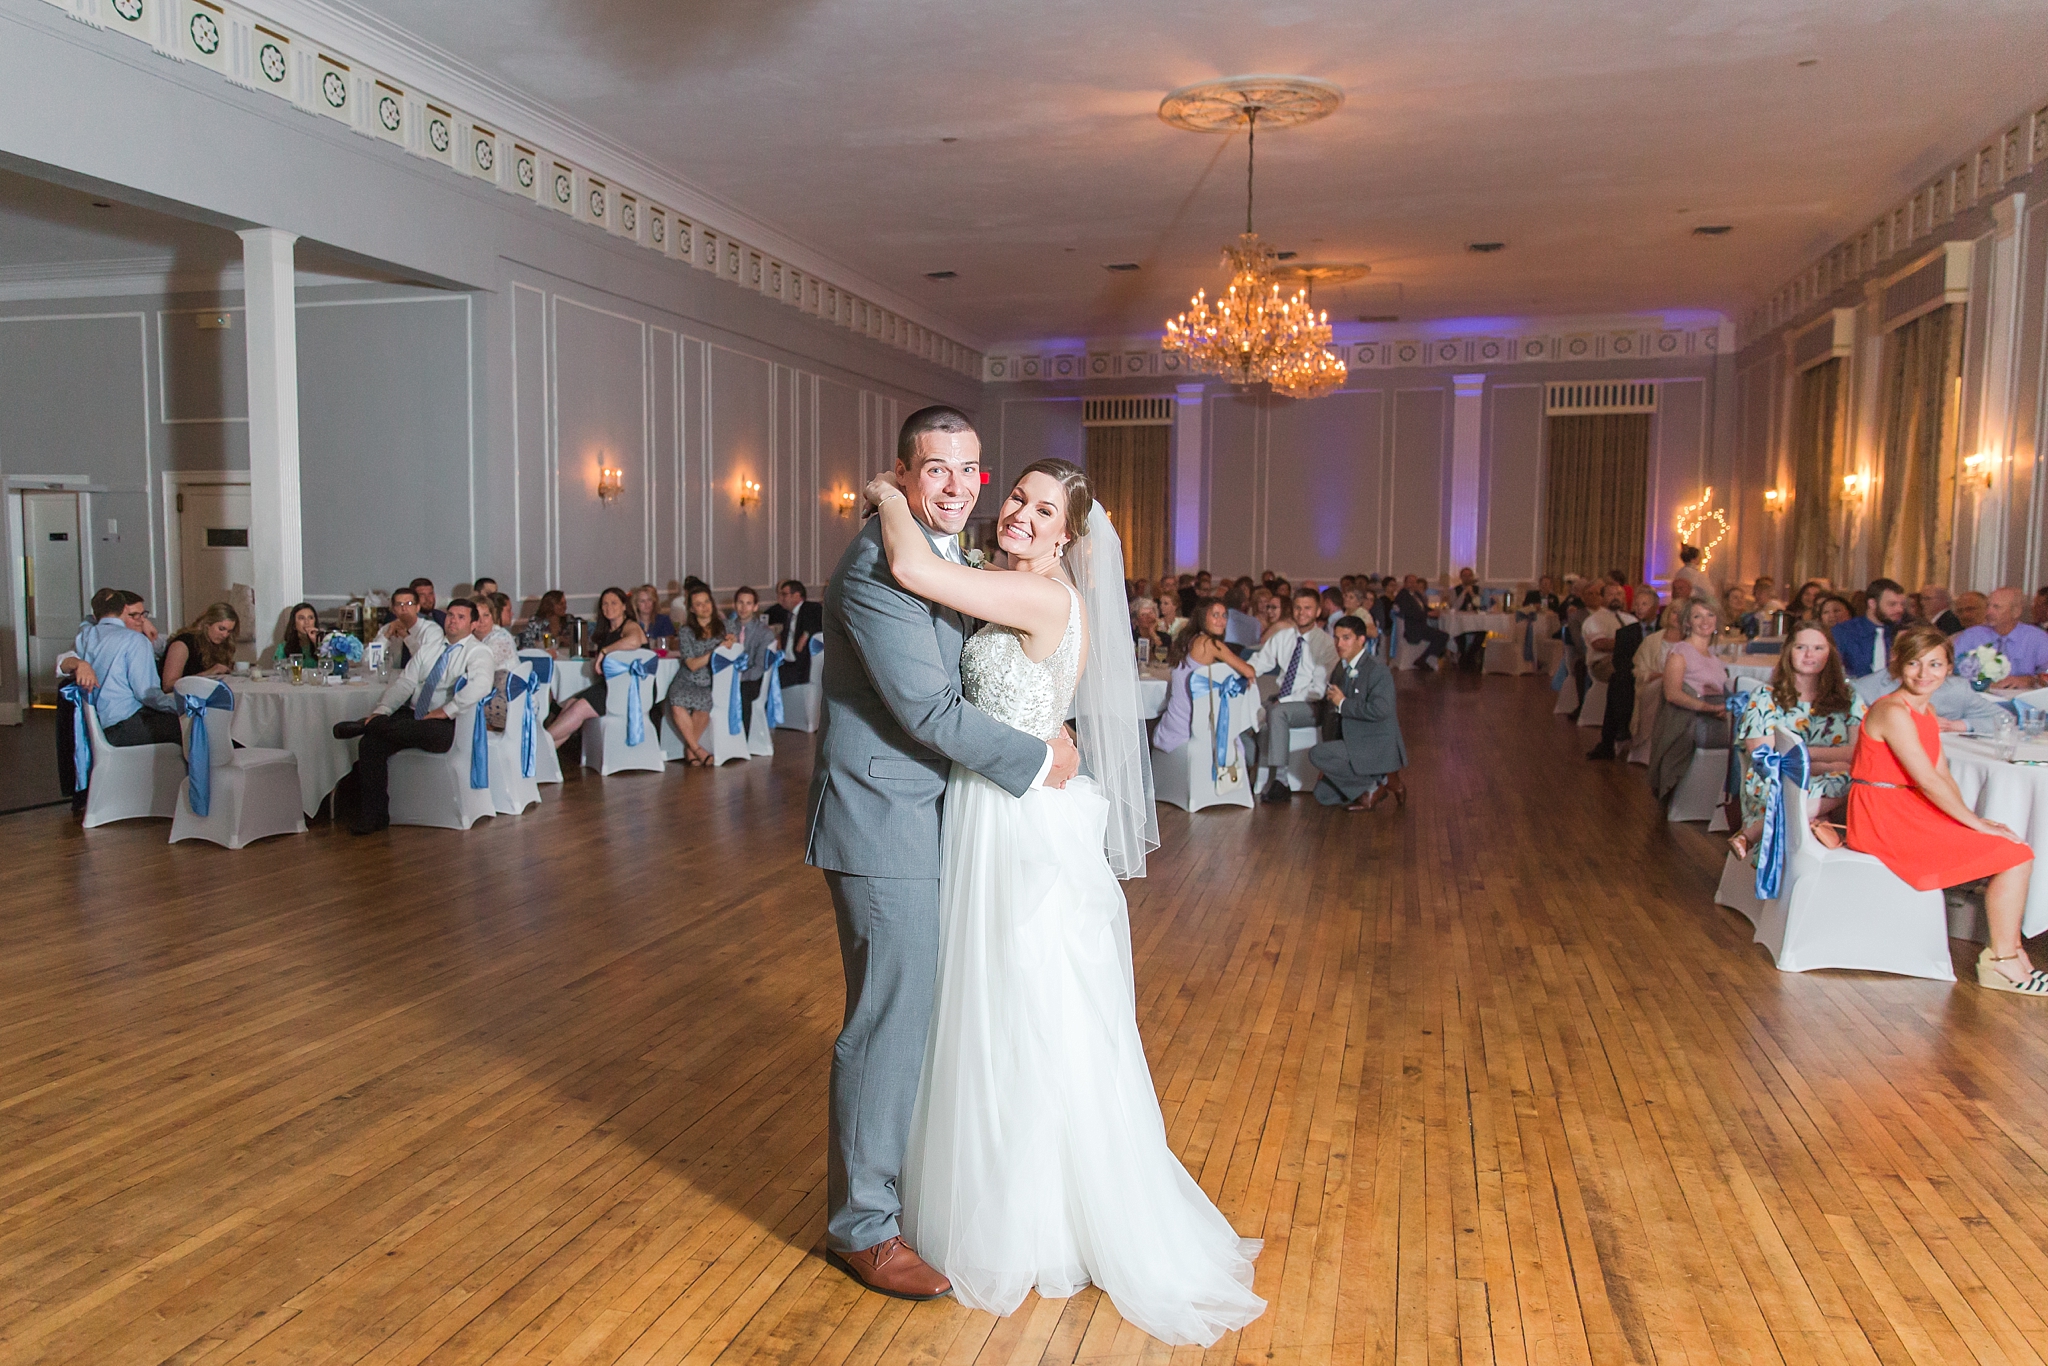 classic-intimate-fun-wedding-photos-at-the-meeting-house-grand-ballroom-in-plymouth-michigan-by-courtney-carolyn-photography_0095.jpg